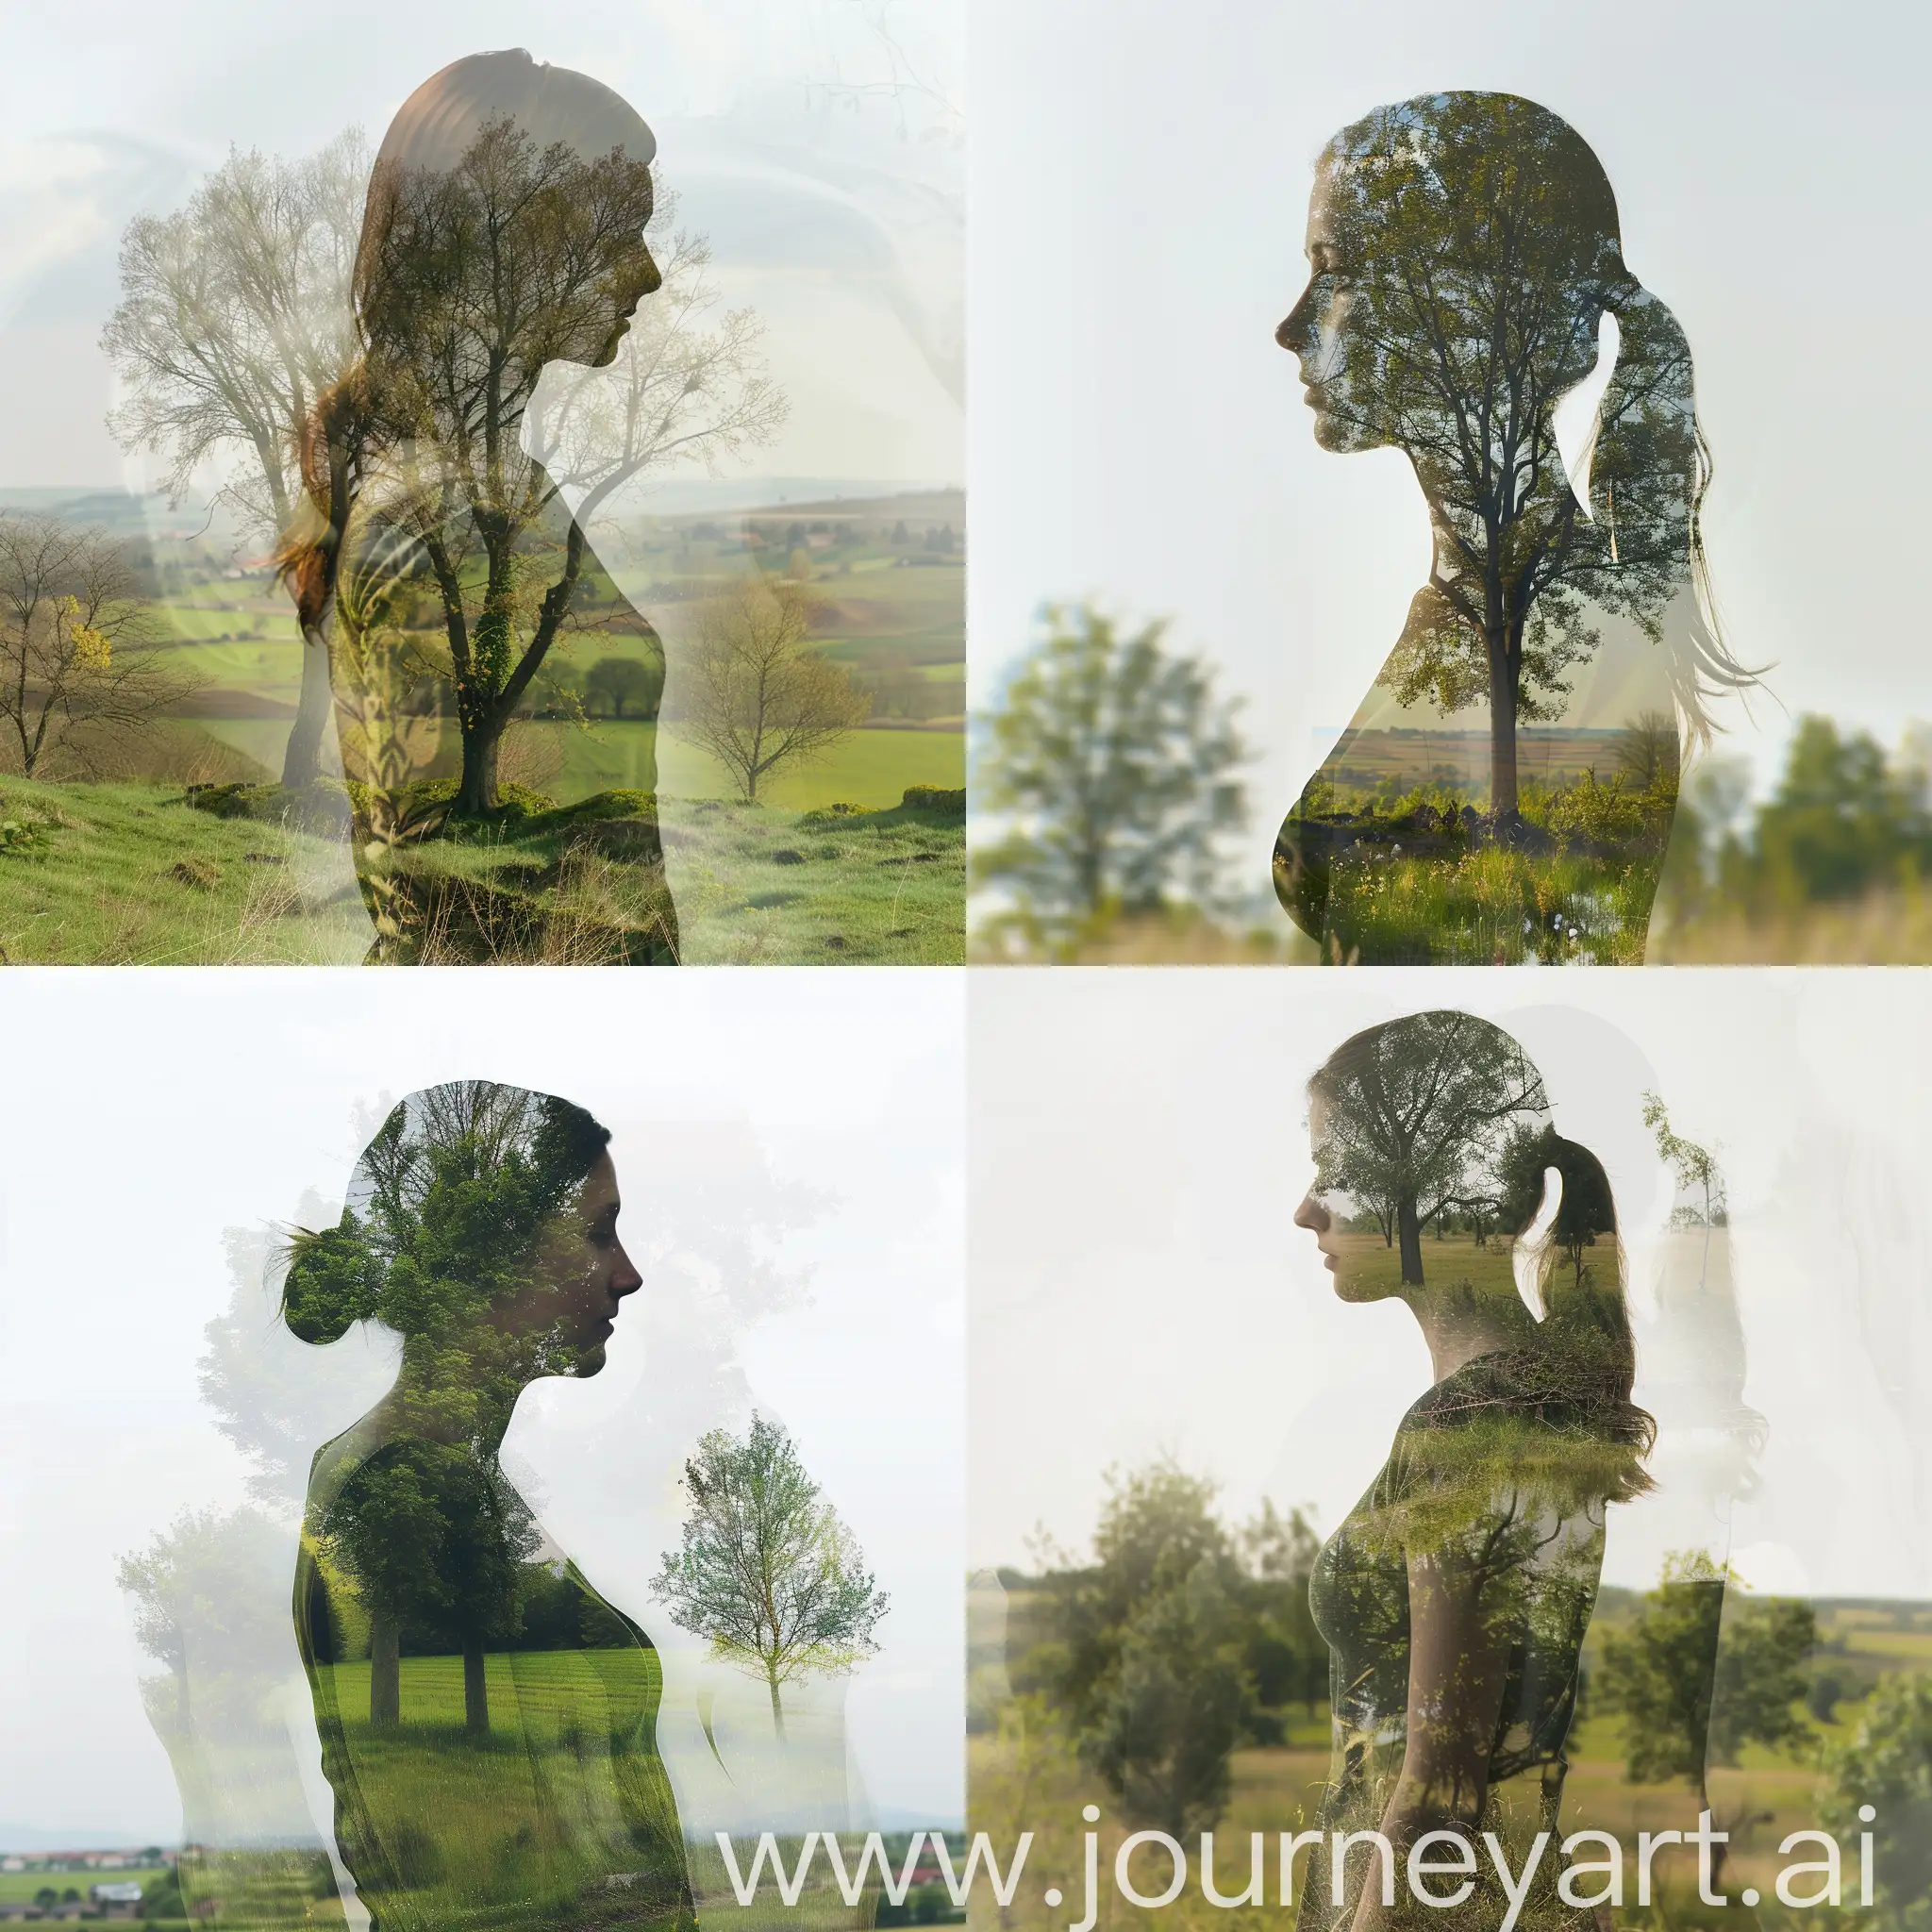 Transparent-Woman-in-Nature-Ethereal-Beauty-among-Trees-and-Green-Fields